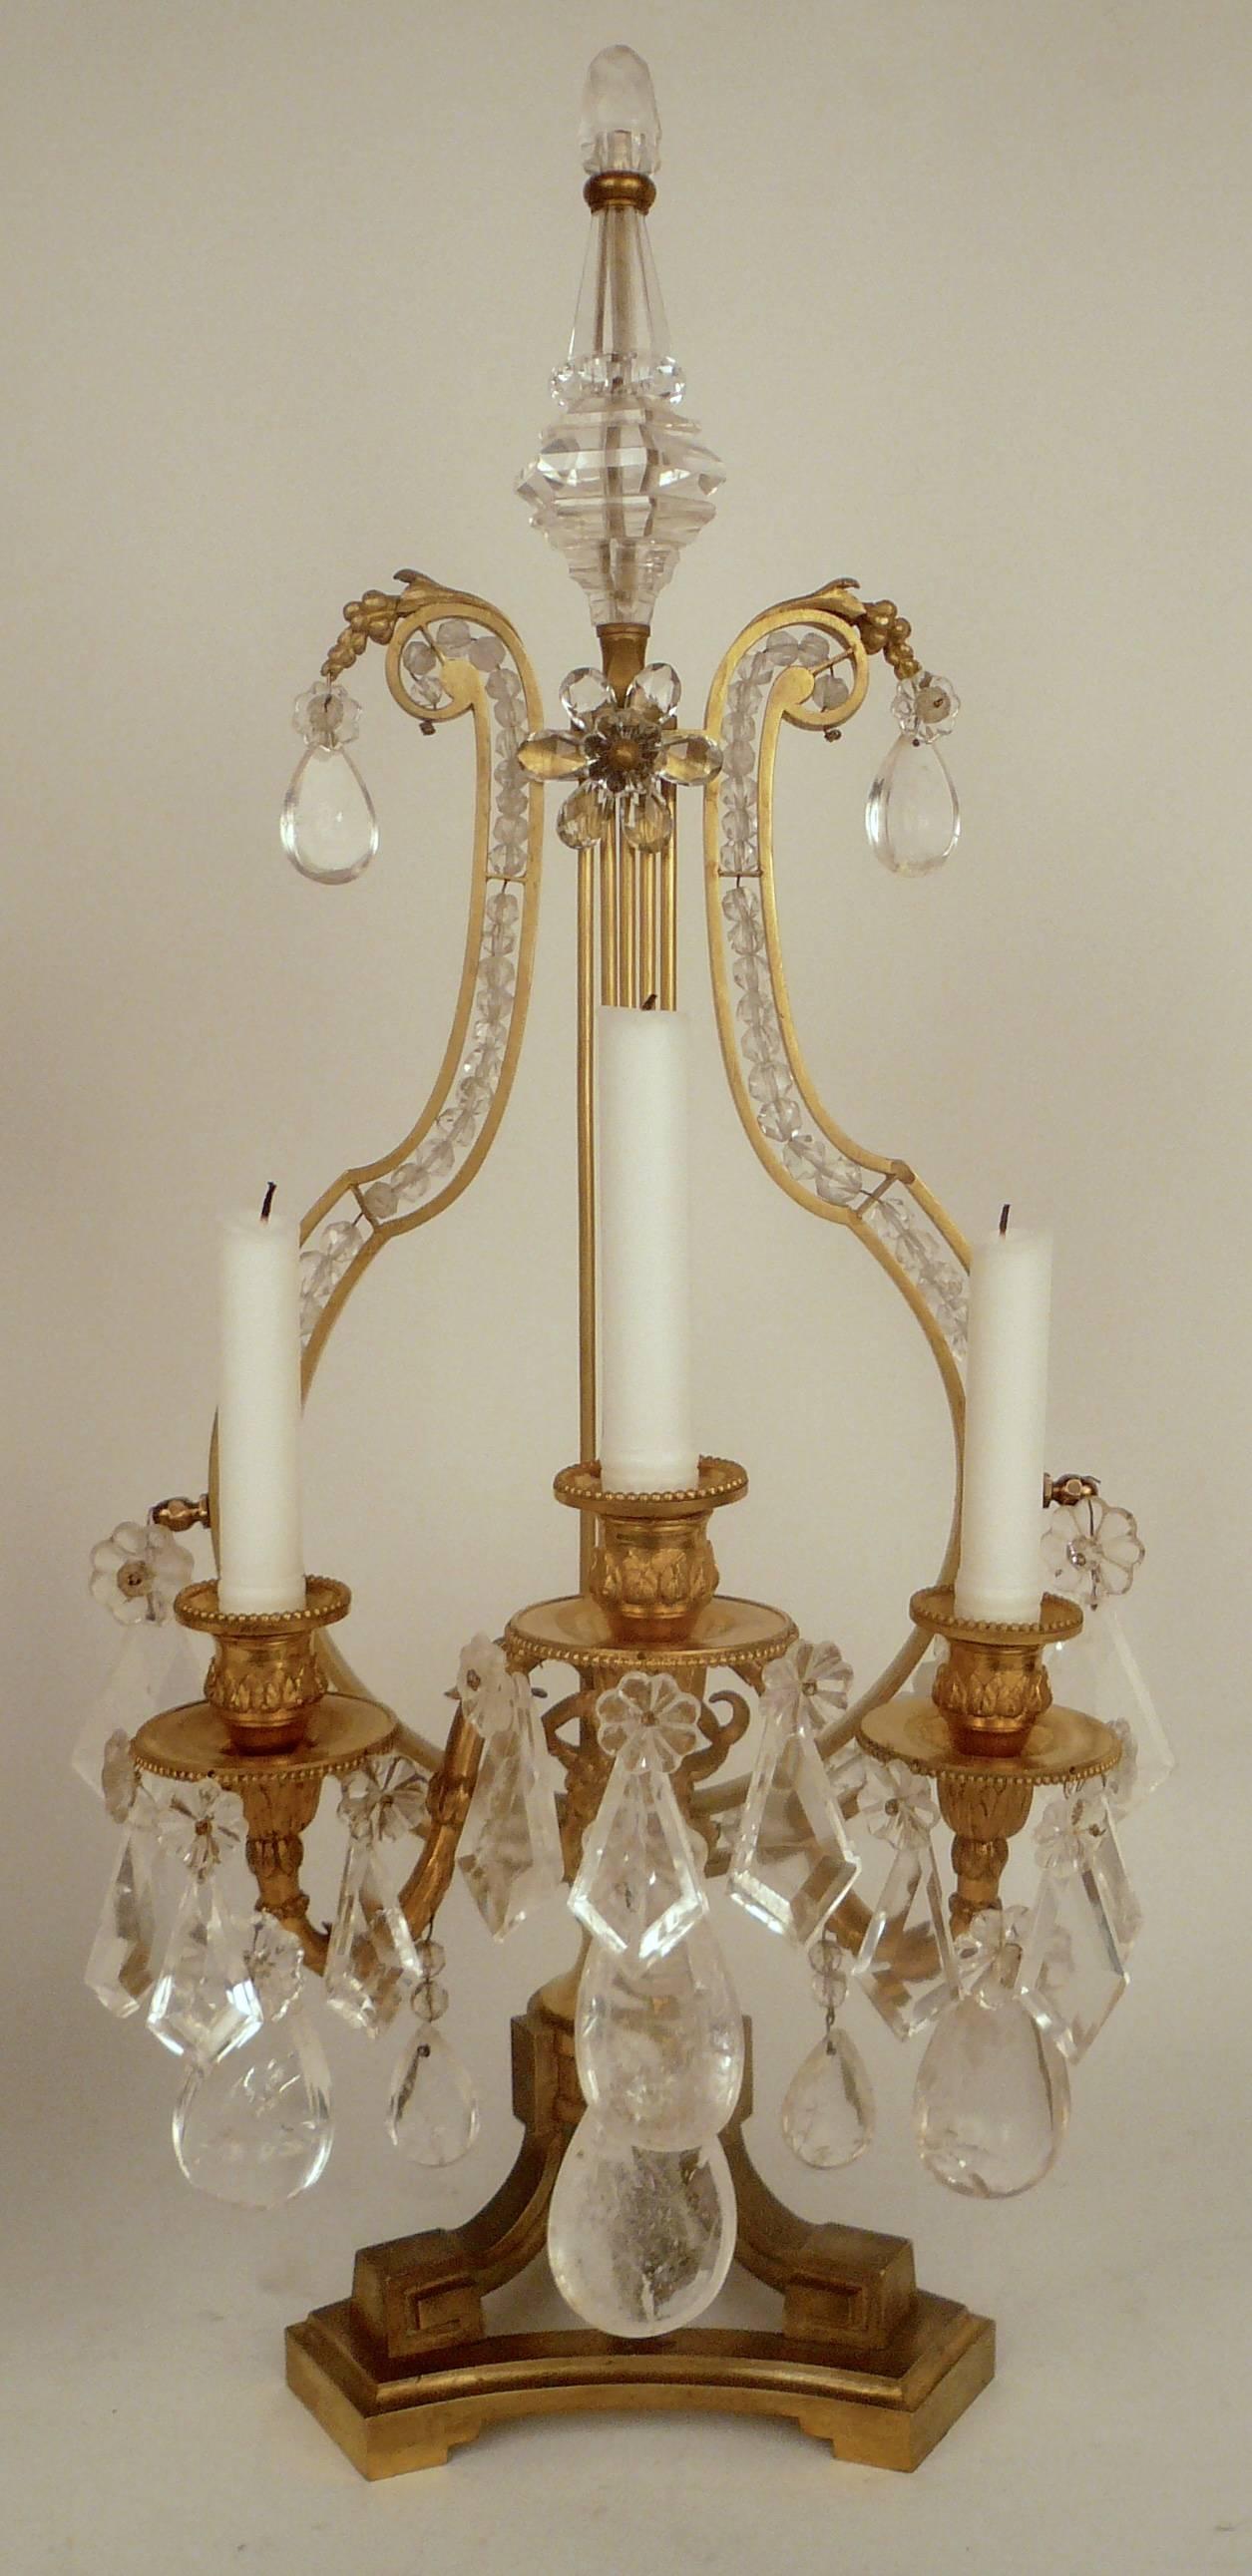 This pair of French girandoles or lustres, feature neoclassical motifs, including ram's heads and lyre form backs.